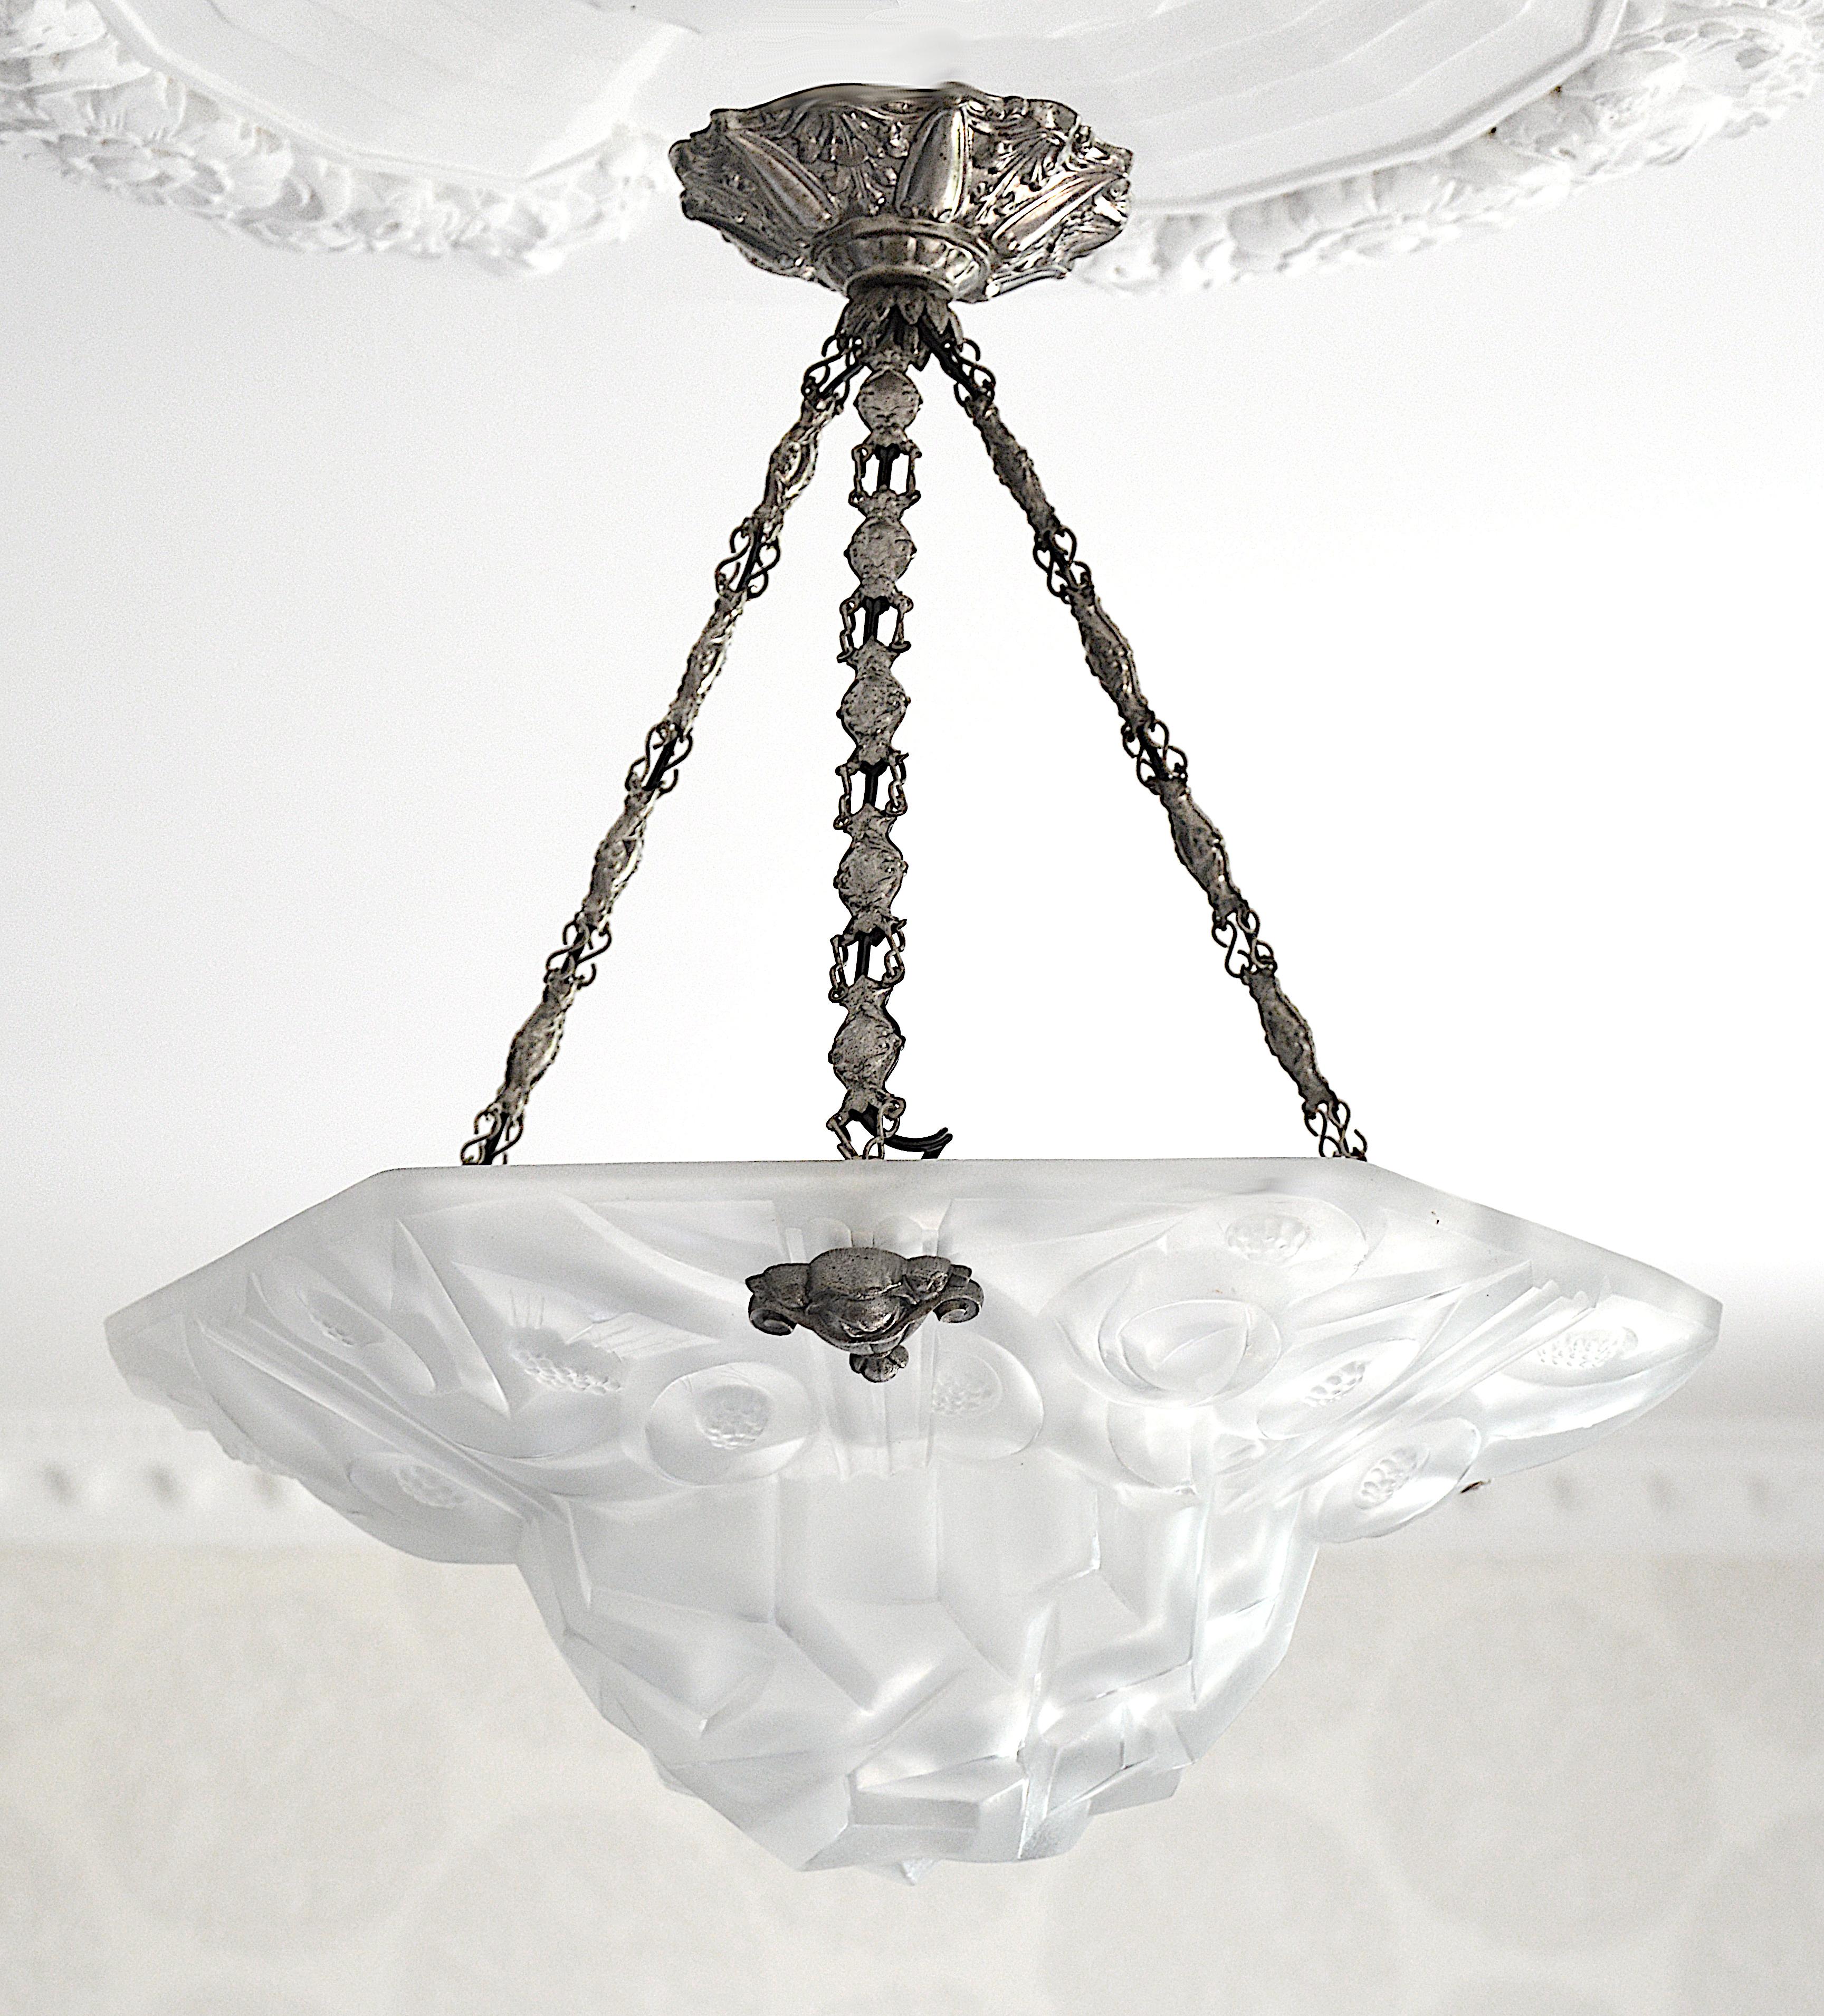 Thick French Art Deco pendant chandelier by Edouard Cazaux at DEGUE's, France, 1928-1930. Thick white frosted glass shade with a stylized floral pattern with sharpen edges typical of the Cazaux's work. The silver plate stamped brass frame shows a